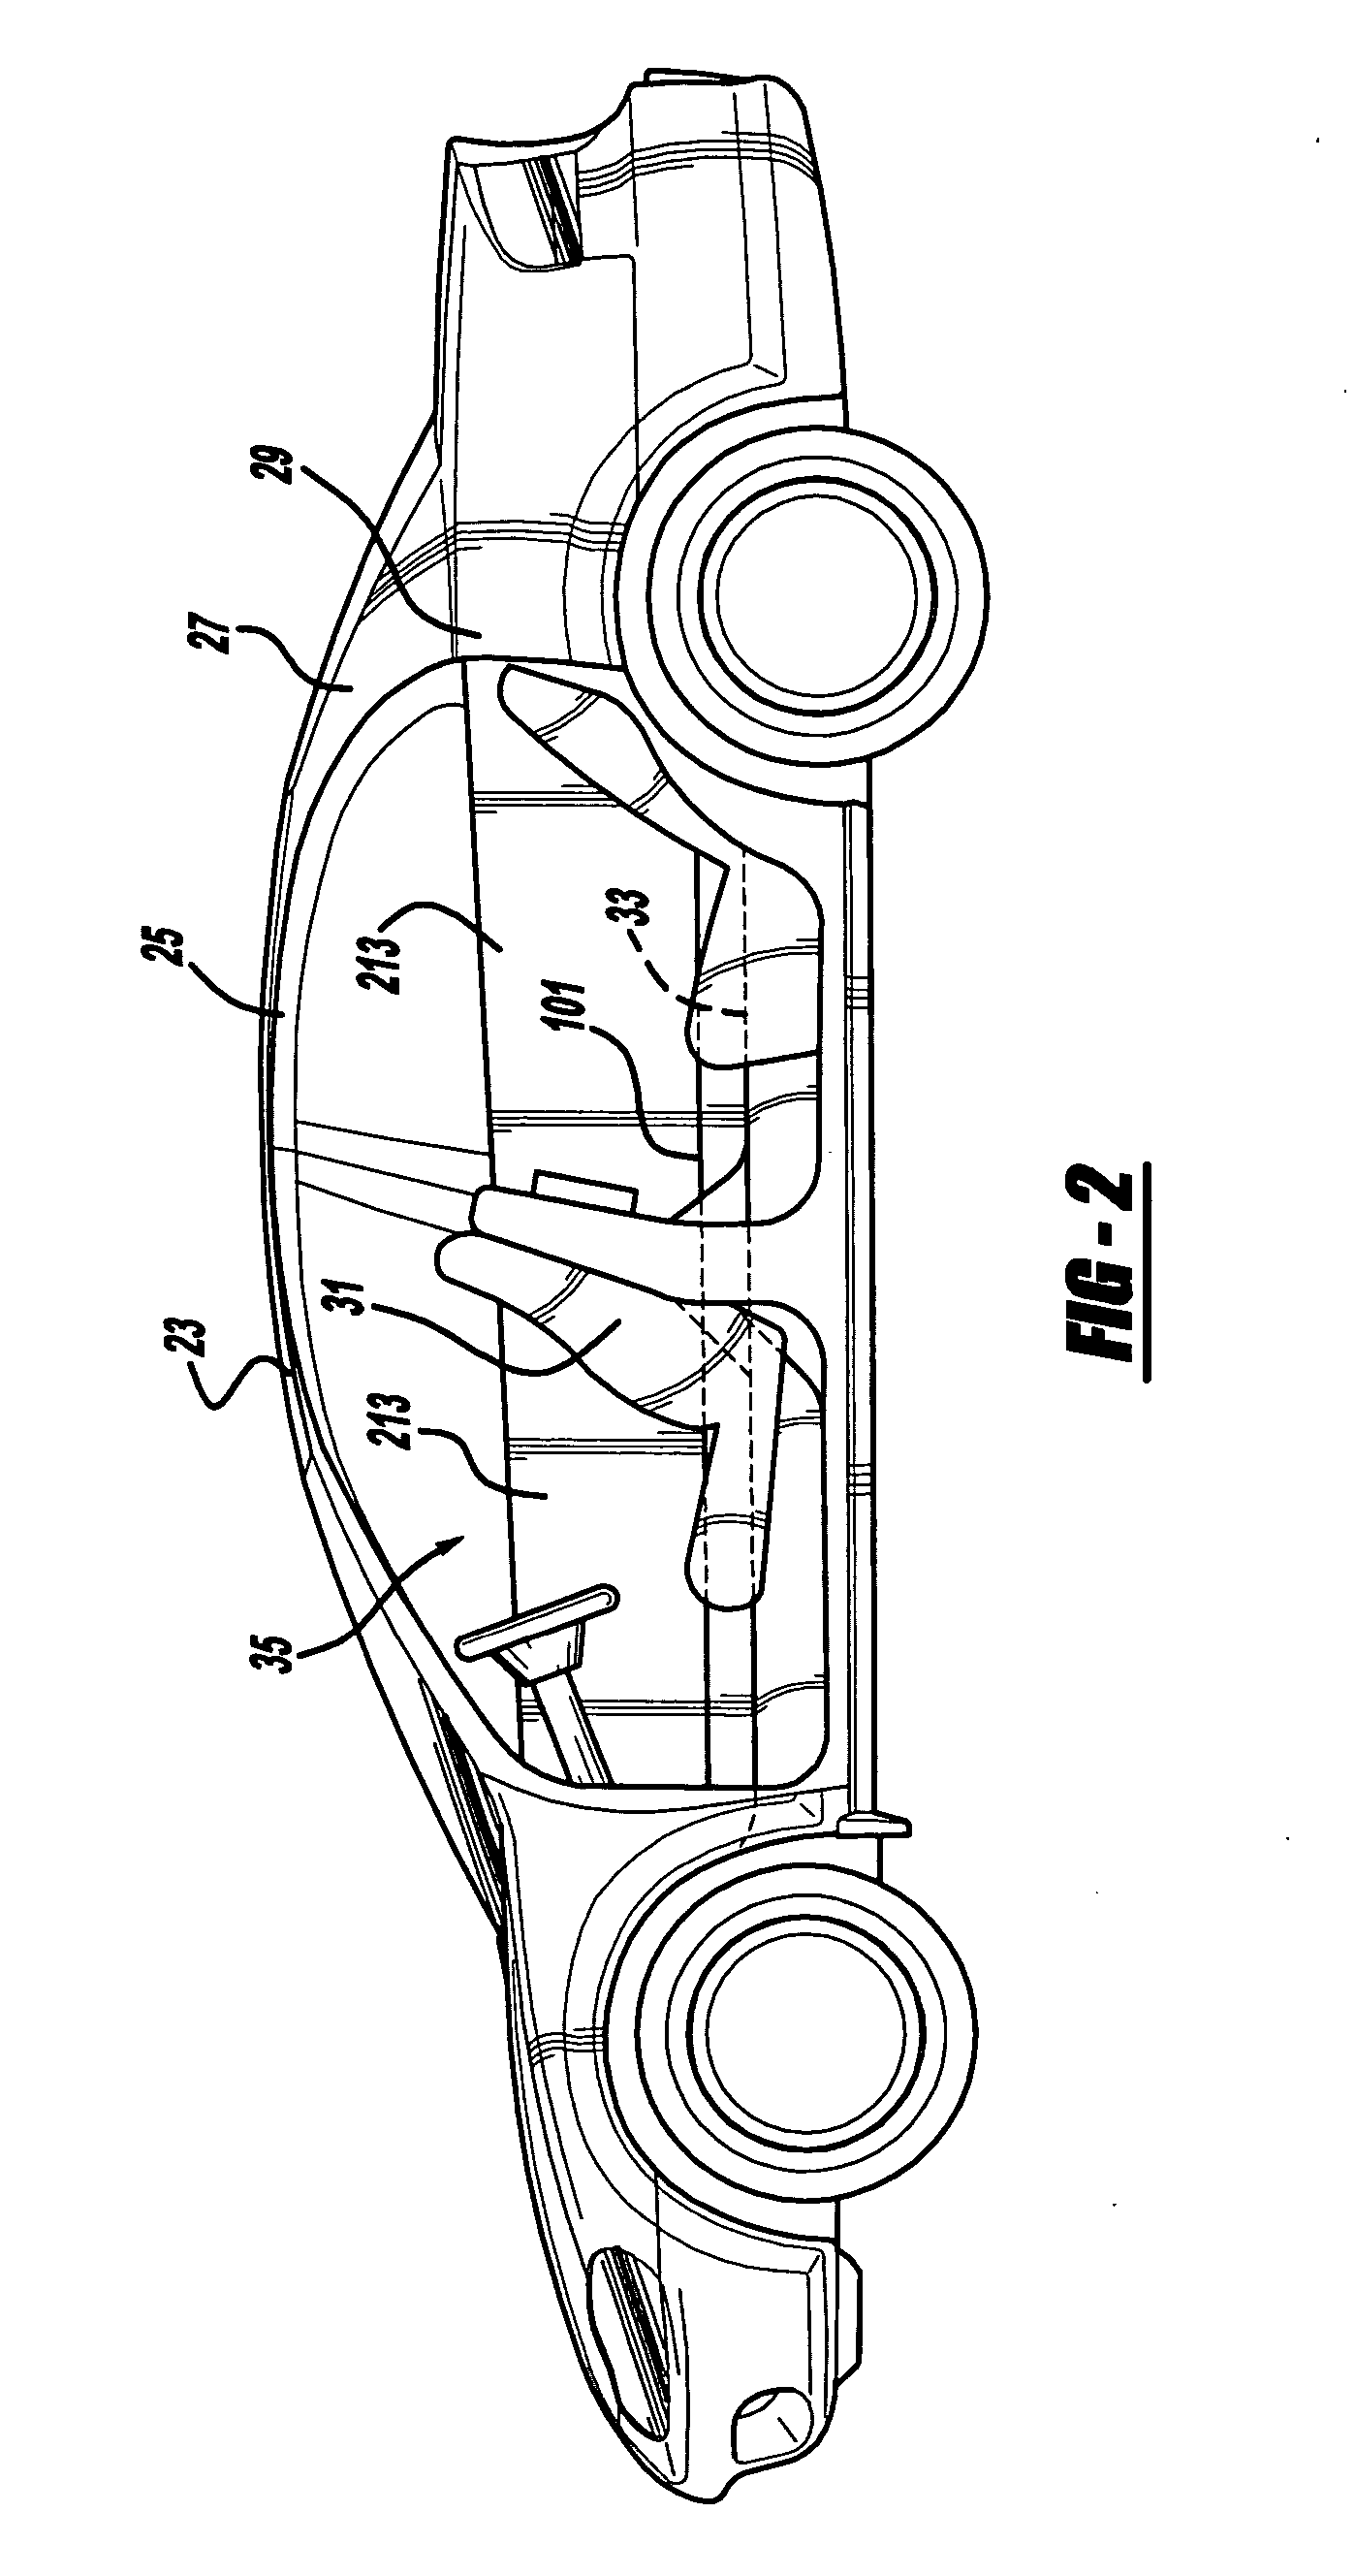 Structural system for a convertible automotive vehicle